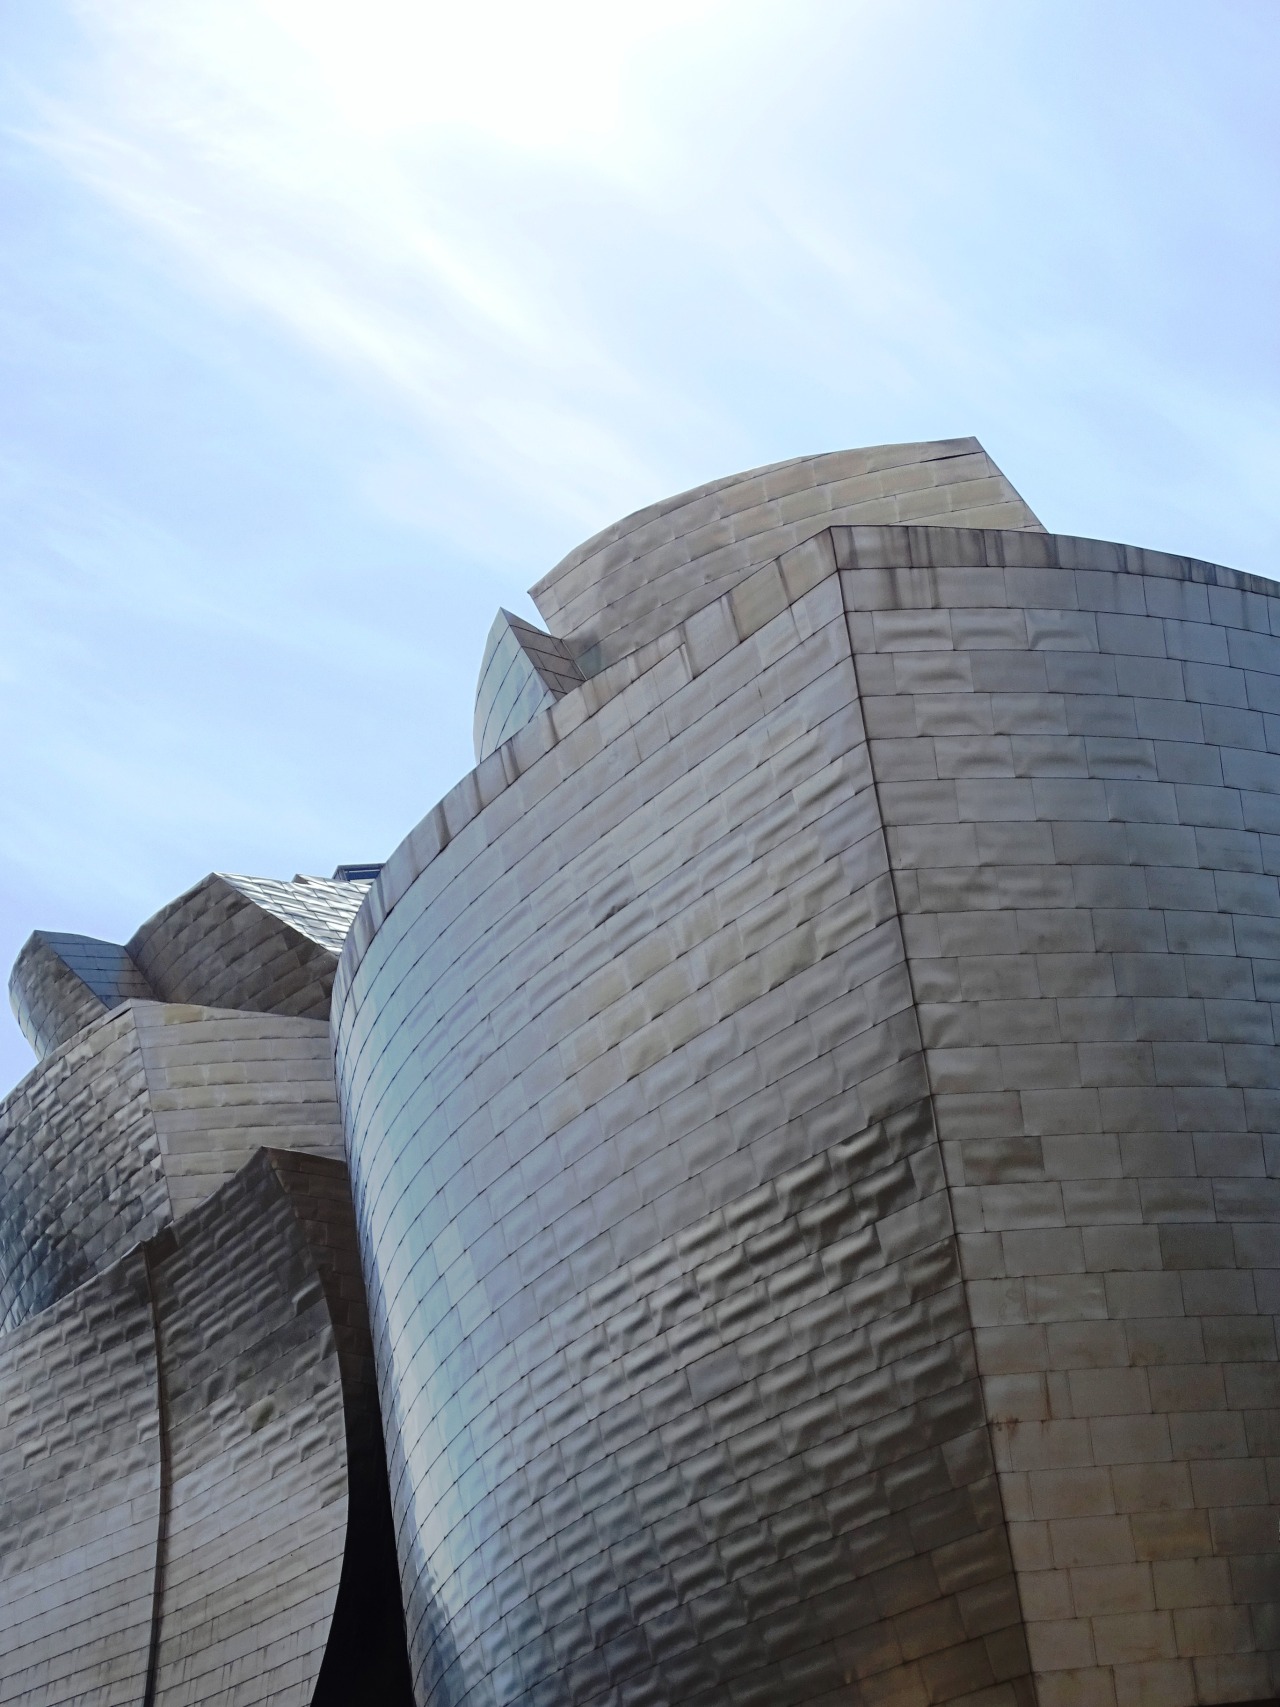 Clouds (No. 700)Bilbao, Spain #Bilbao #Guggenheim Museum Bilbao  #Tall Tree & the Eye by Anish Kapoor  #Frank O. Gehry #Frank Gehry#blue sky#stainless steel#exterior#façade#travel#vacation#architecture#cityscape#reflection #province of Biscay #Basque Country#summer 2021#Northern Spain#Spain#España#Southern Europe#tourist attraction#landmark#original photography